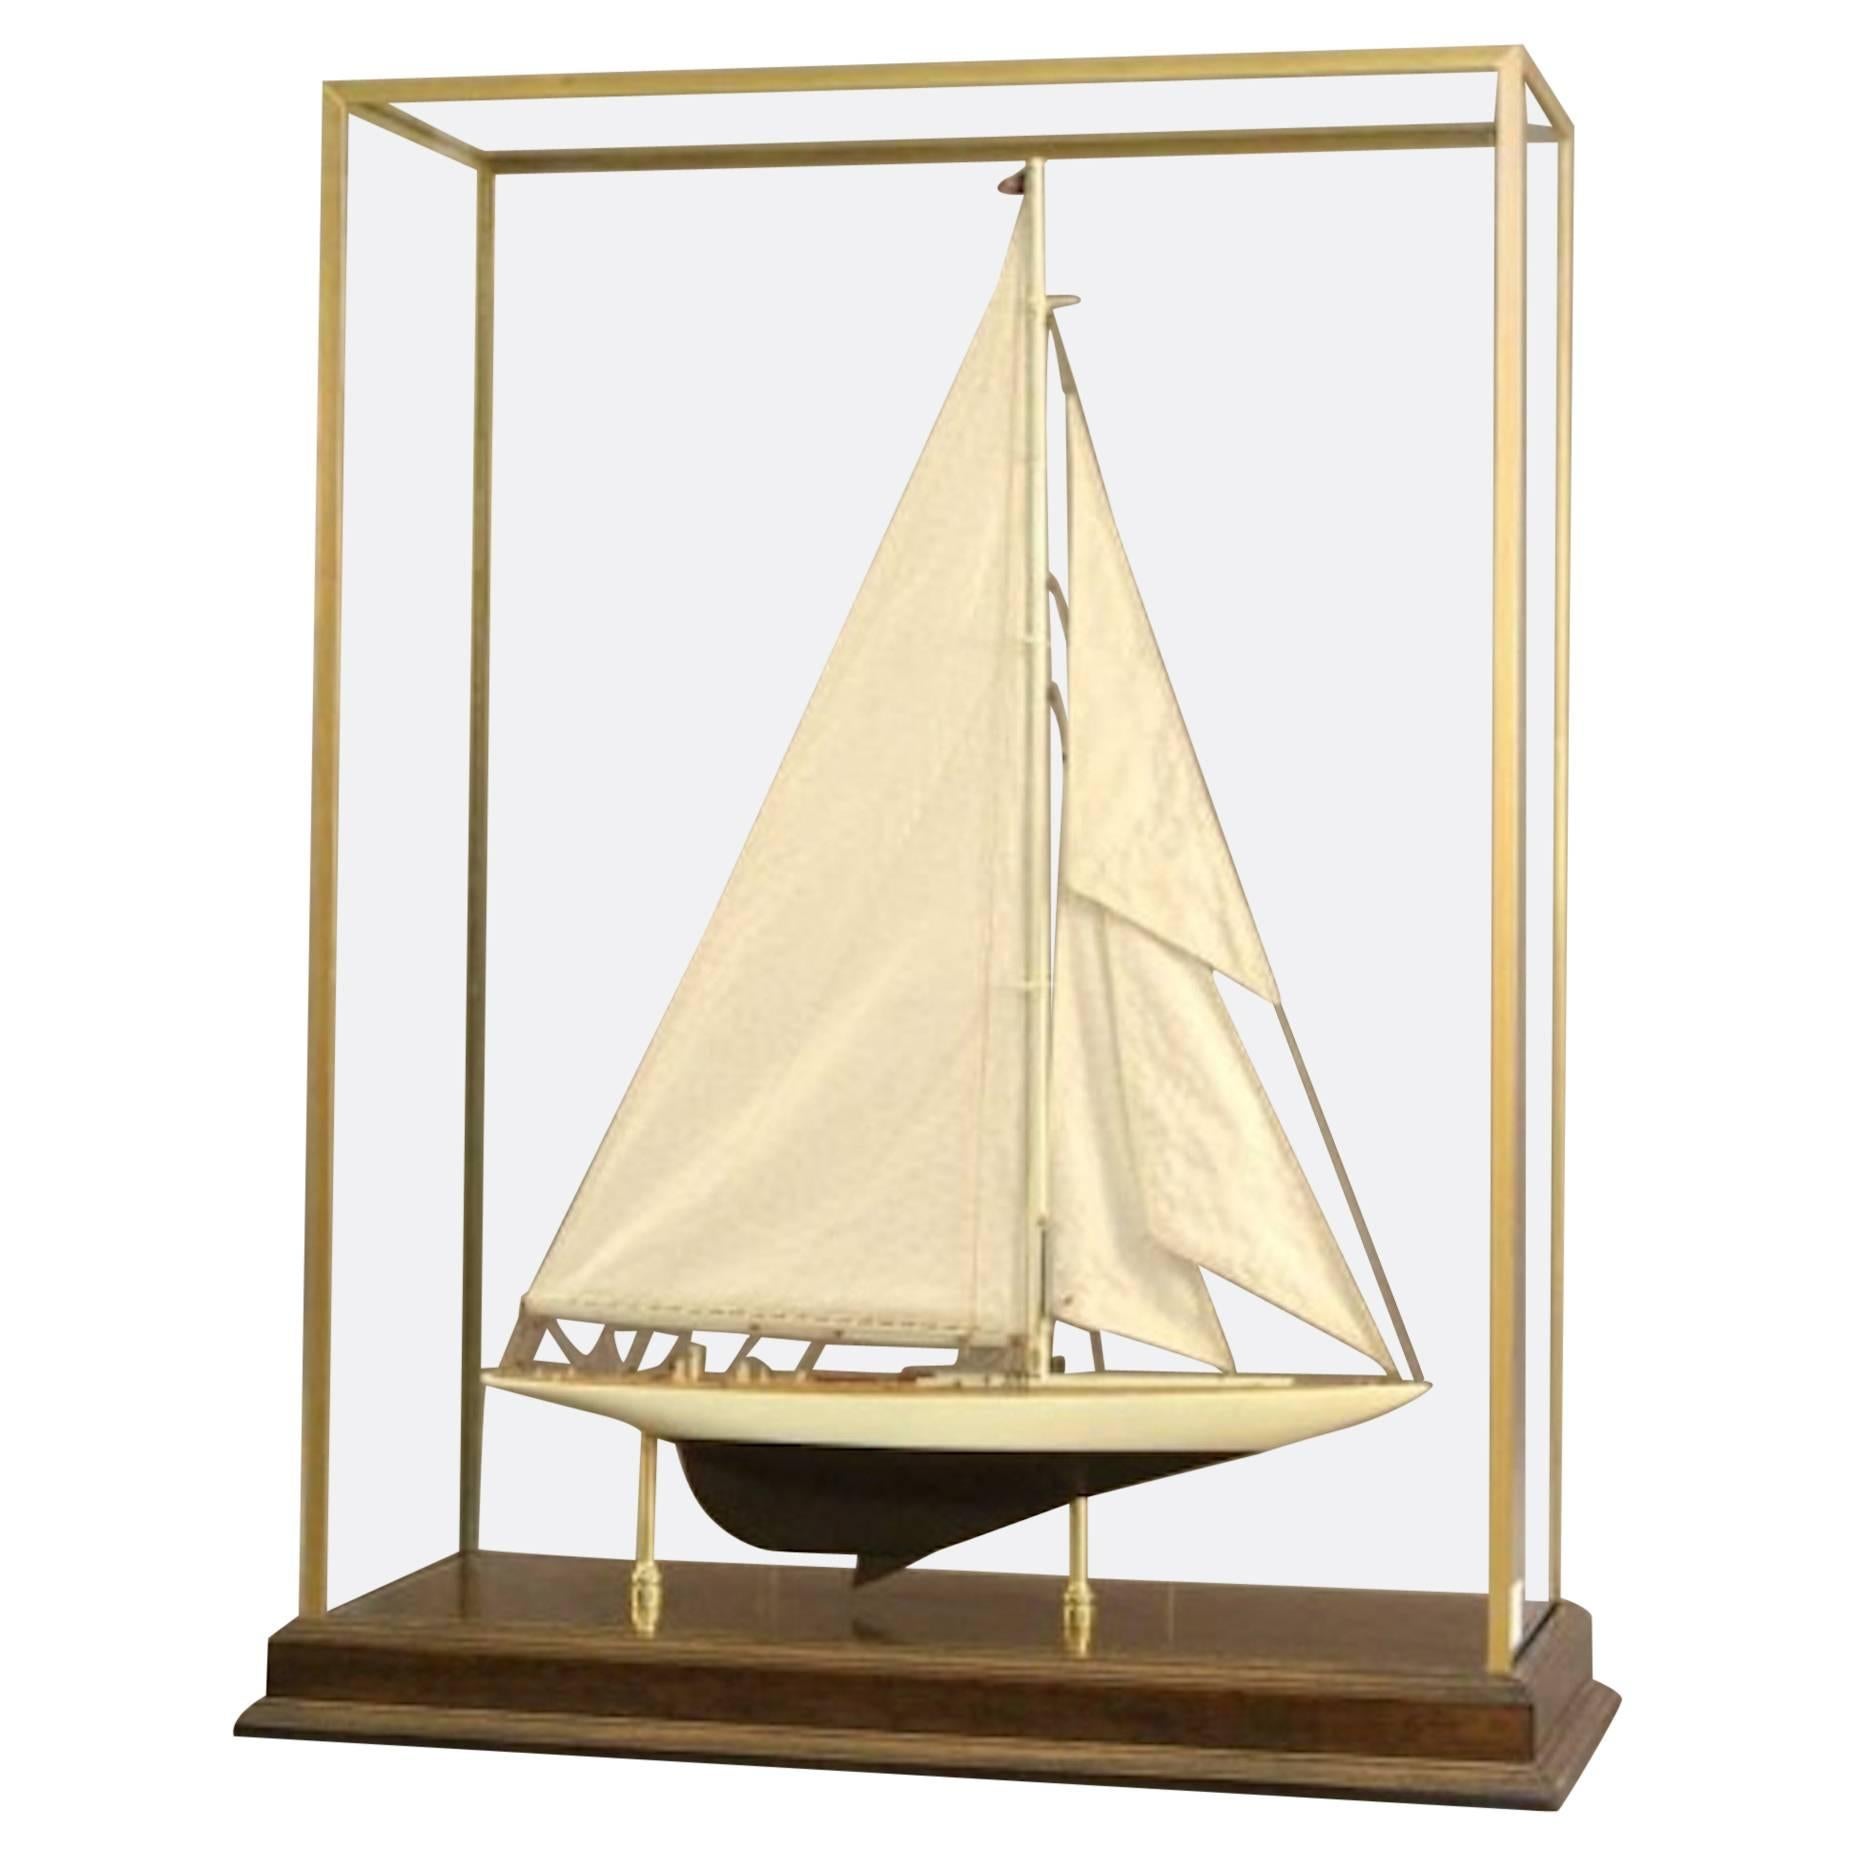 Model of the America’s Cup Yacht “Enterprise” For Sale